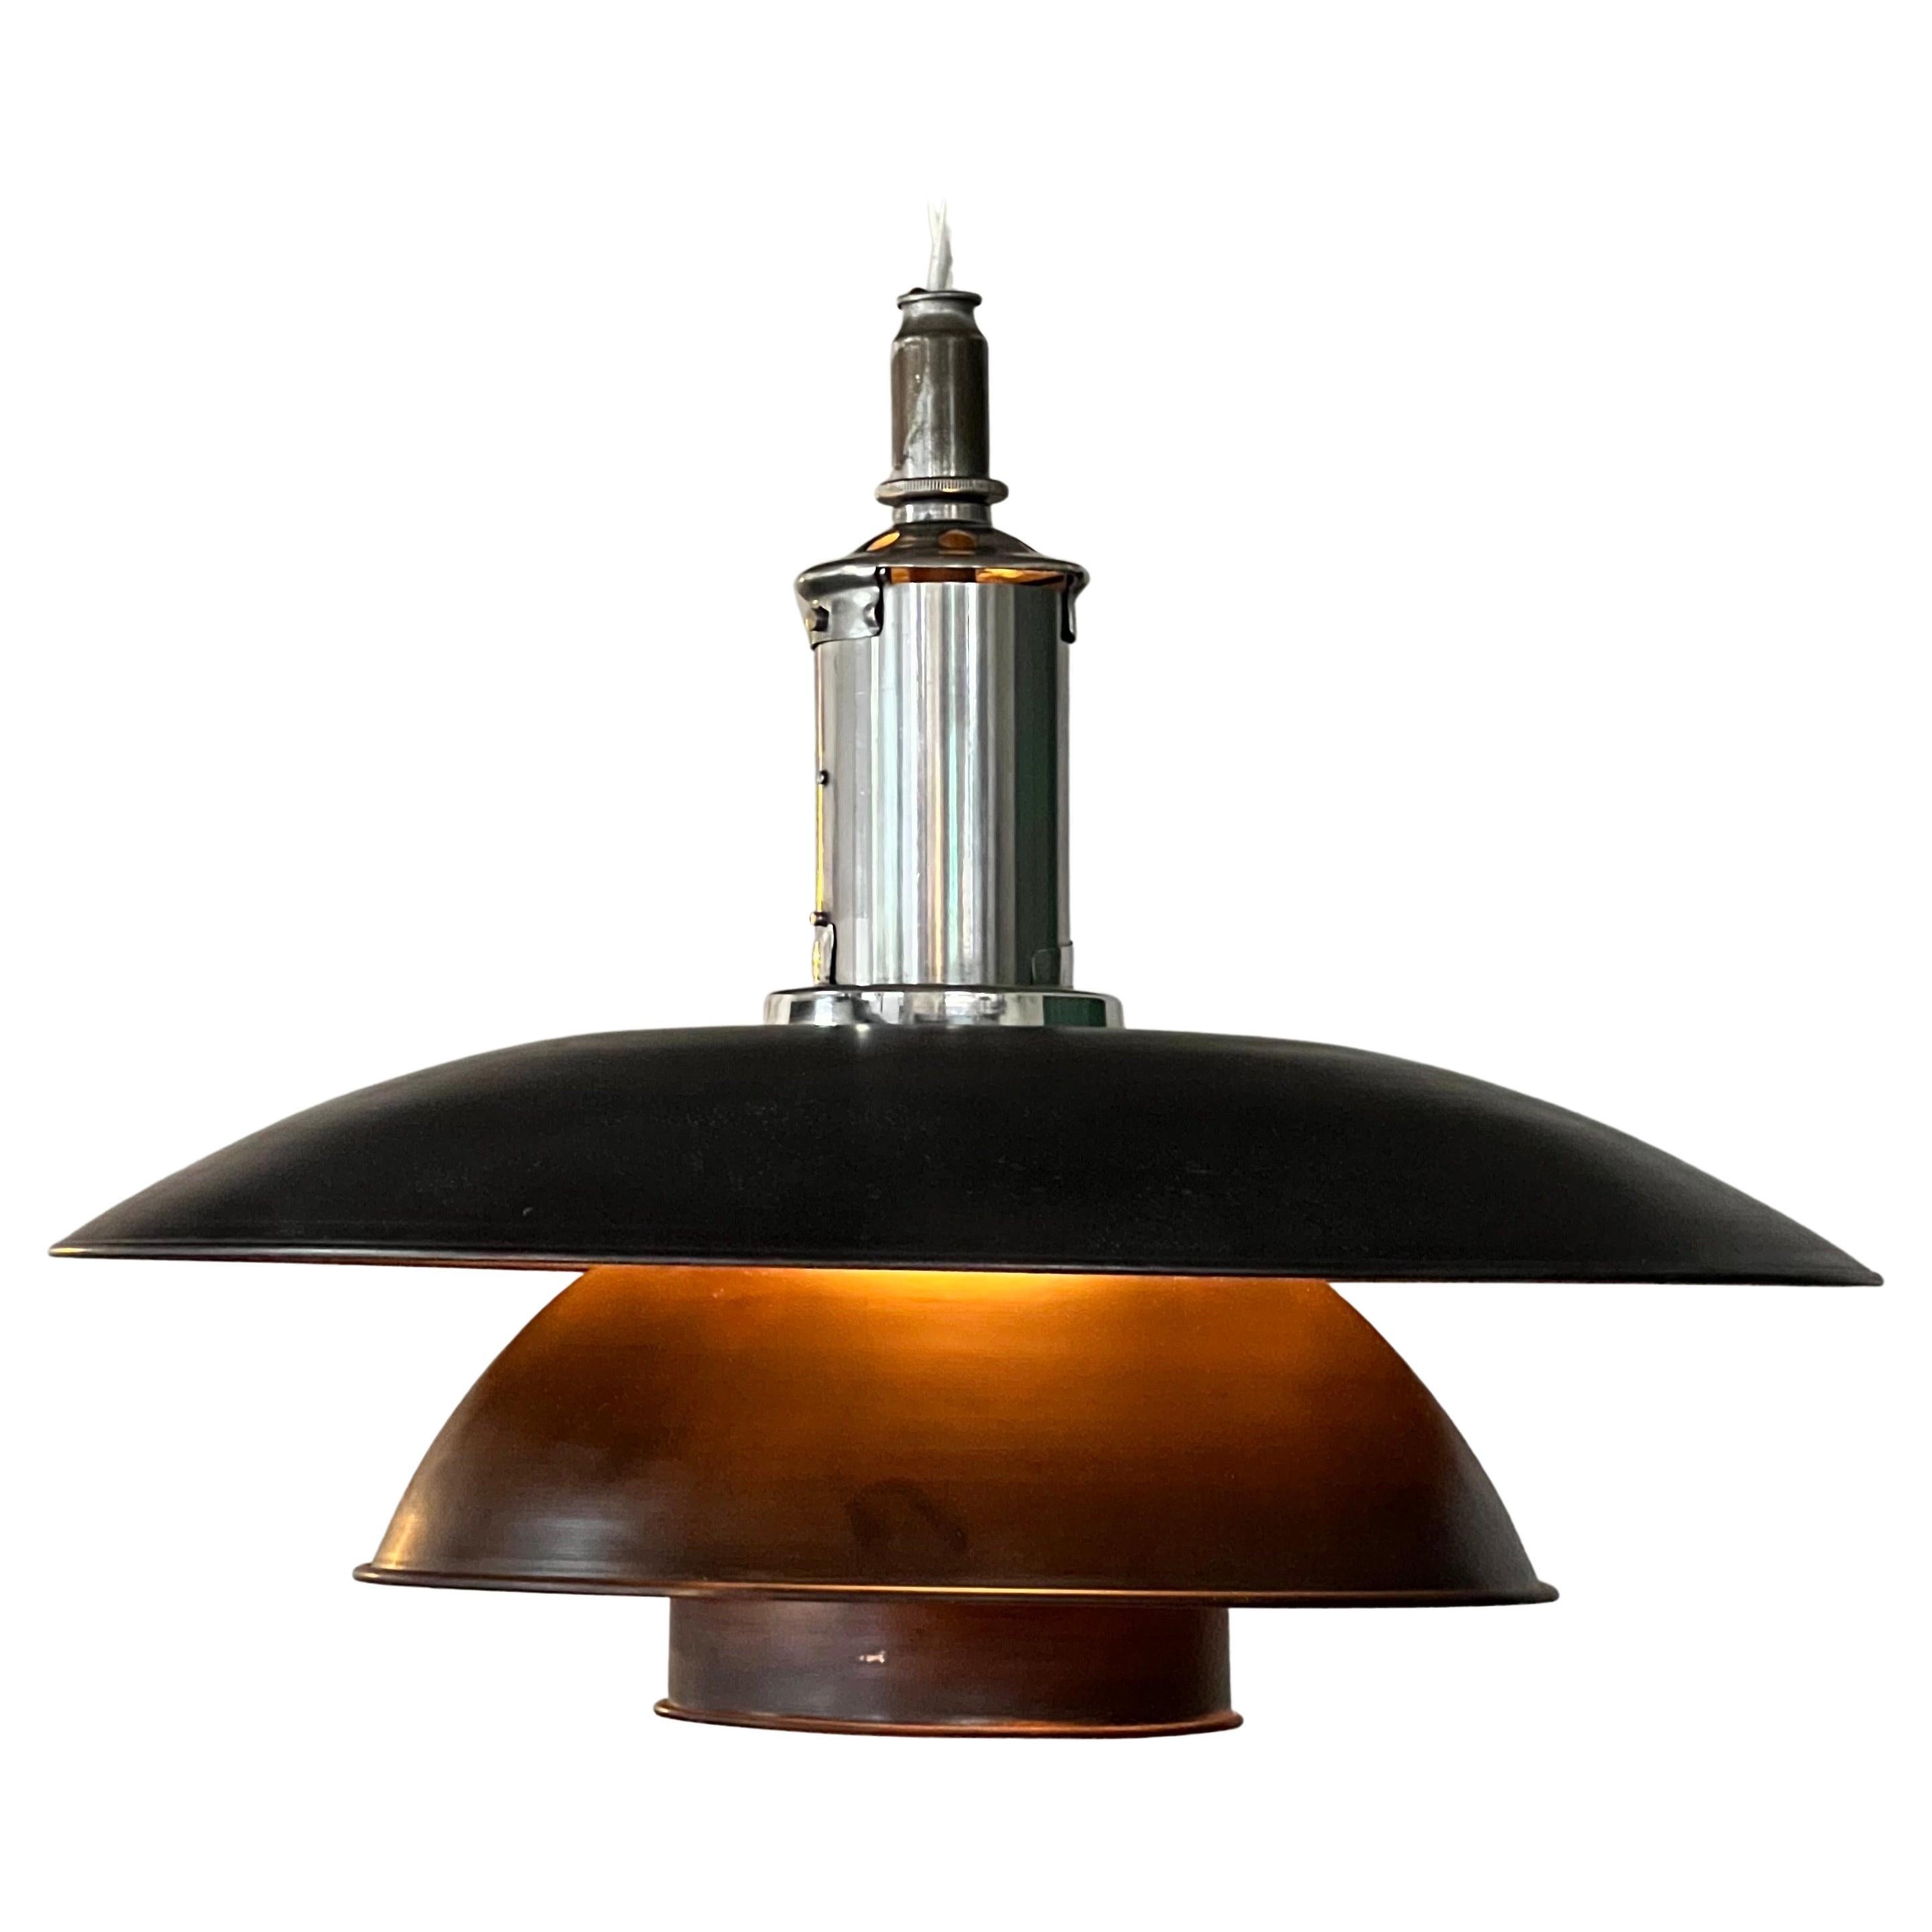 Spectacular copper and brass nickeled suspension lamp made in the 1930s at the famous Louis Poulsen factory. The lamp come in few parts which includes 3 copper shades. Easy to fix install. The lamp remain in excellent condition and is ready to be